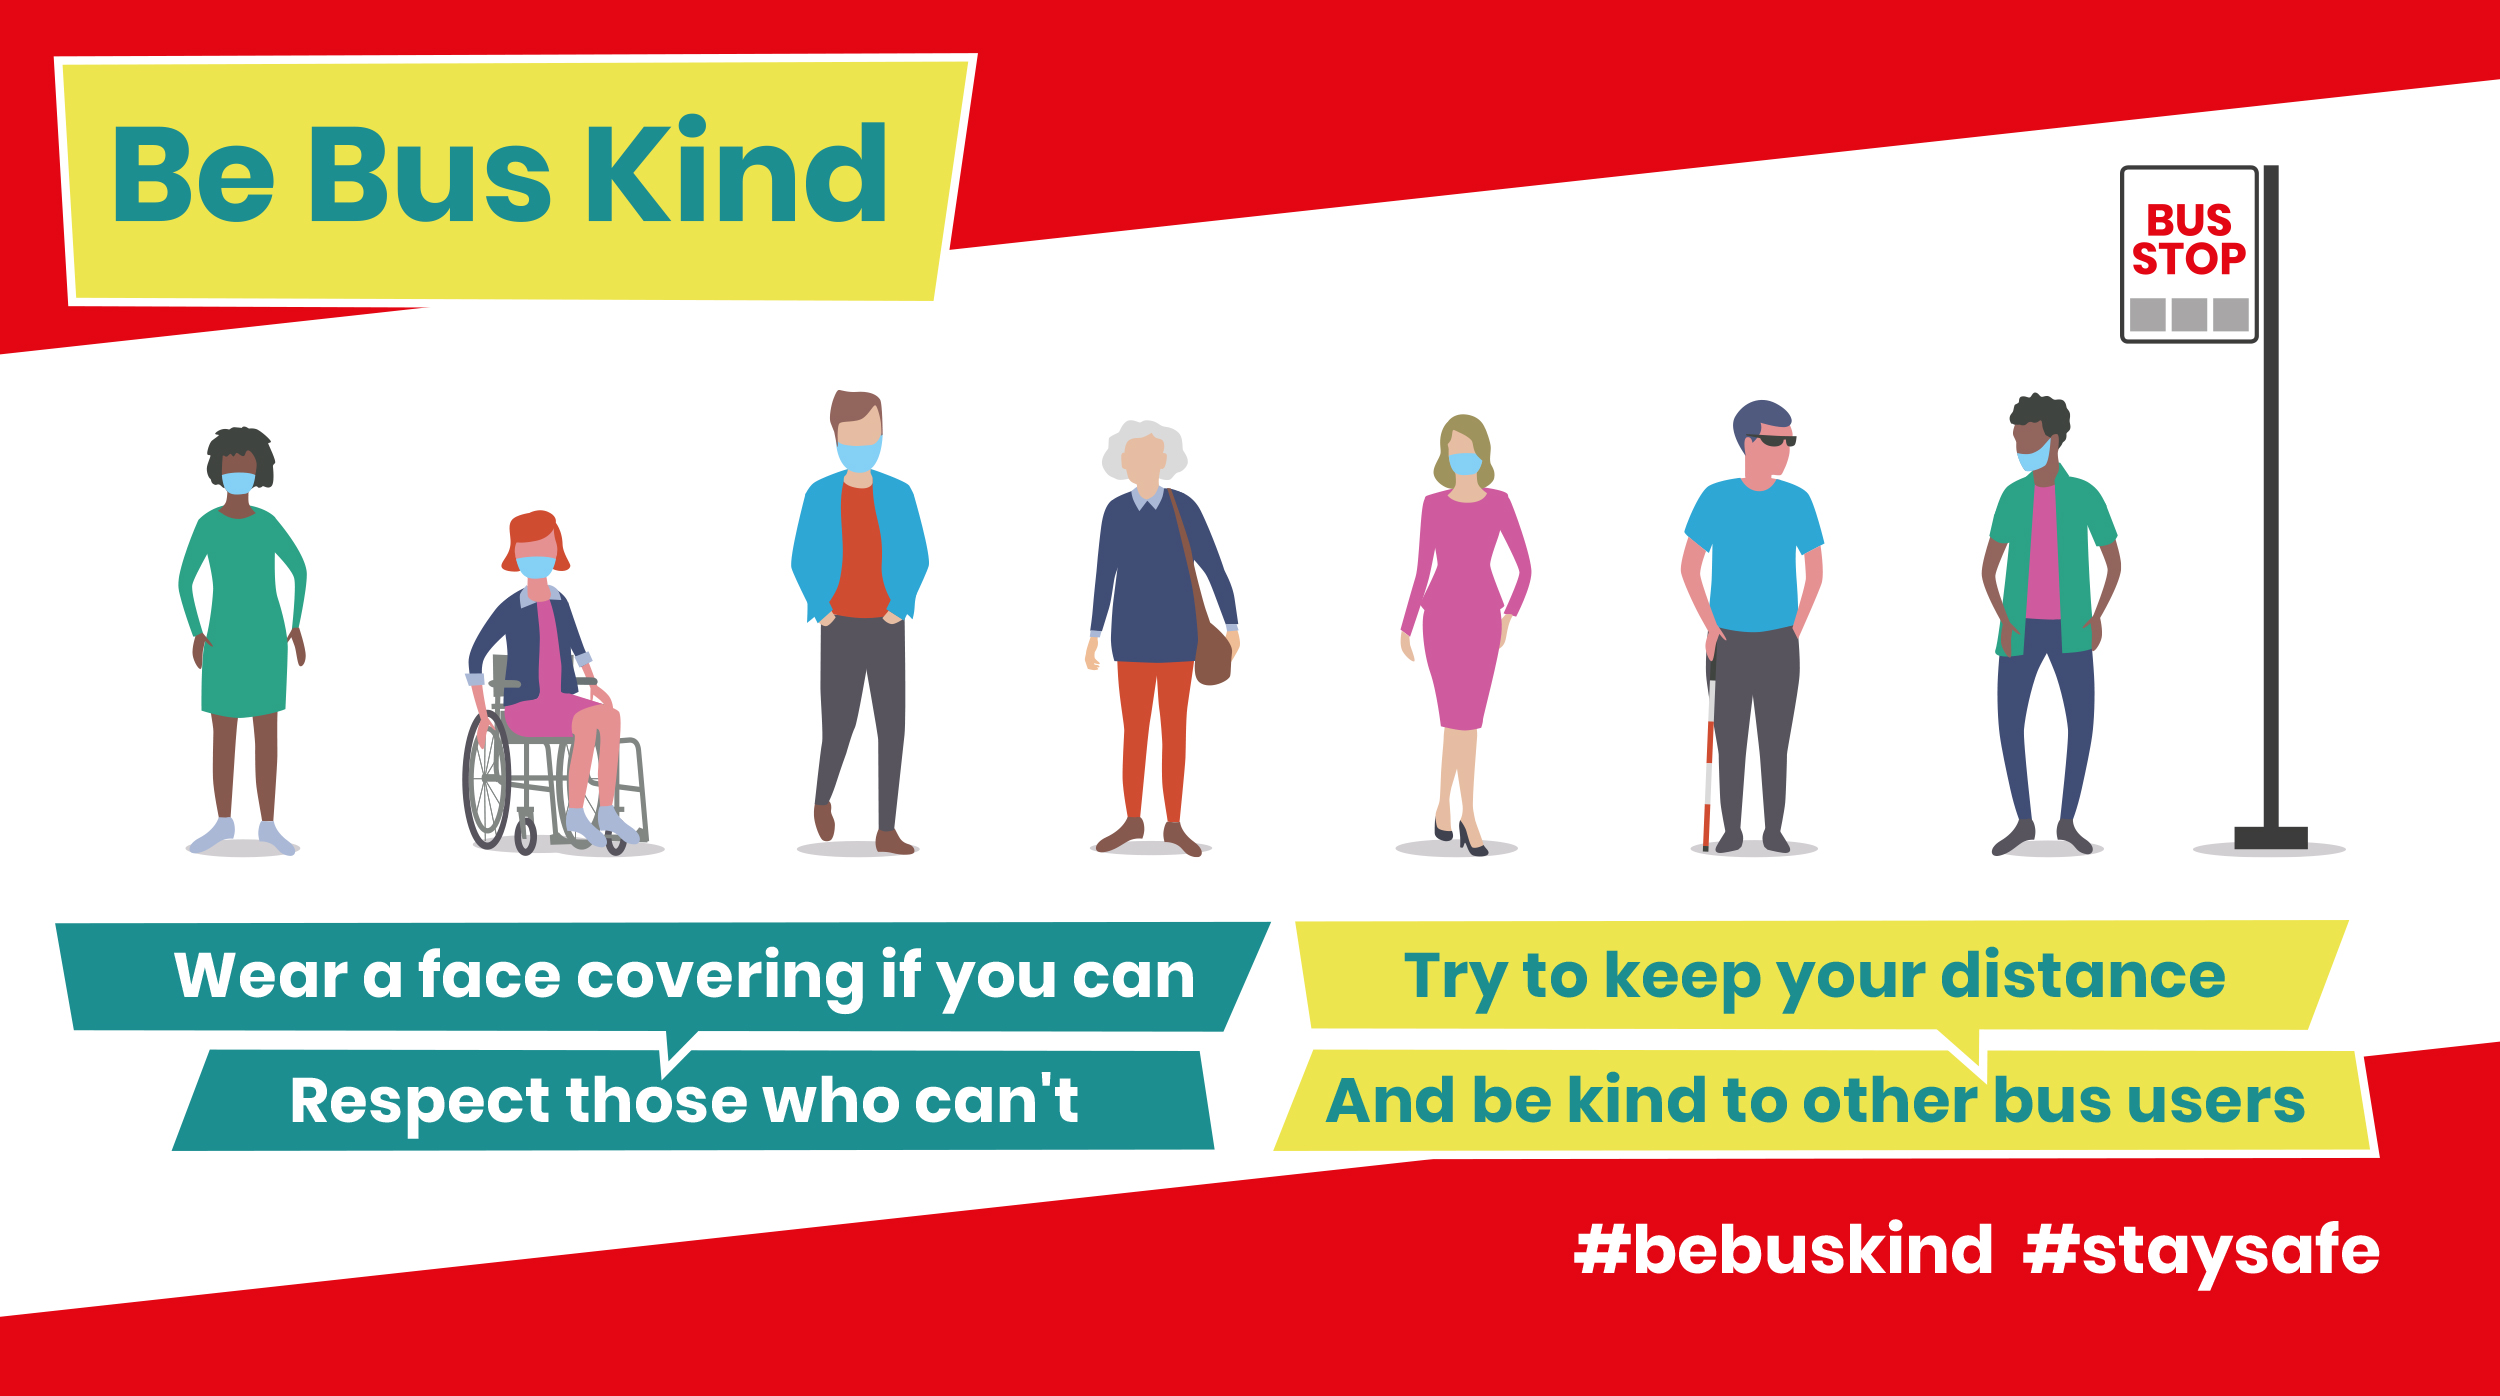 Bus Users urges passengers to #bebuskind